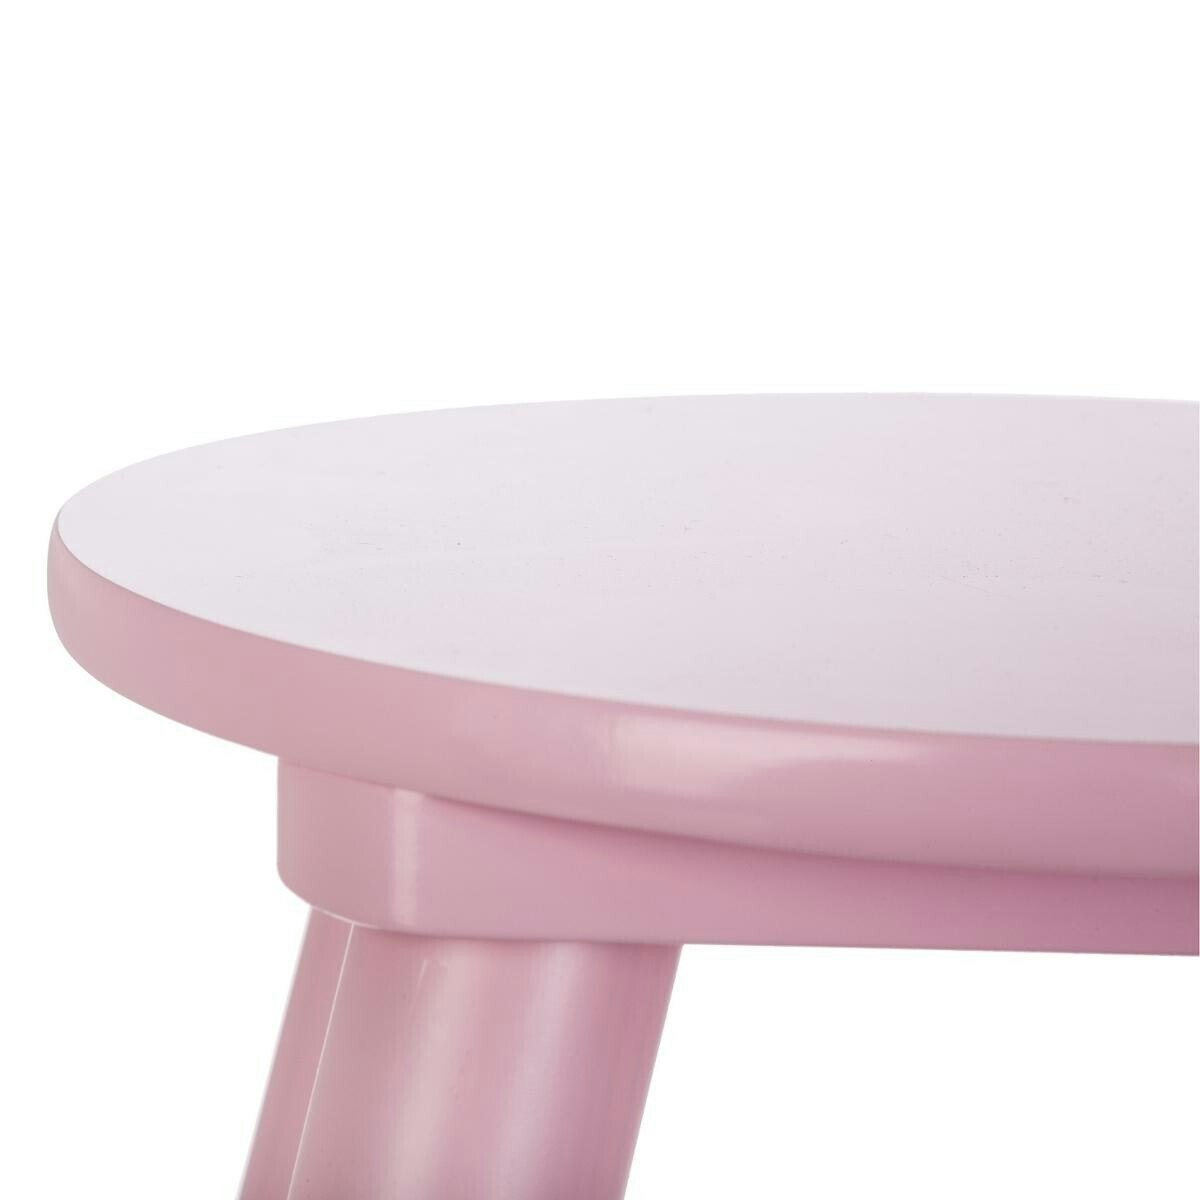 Wooden stool pink 